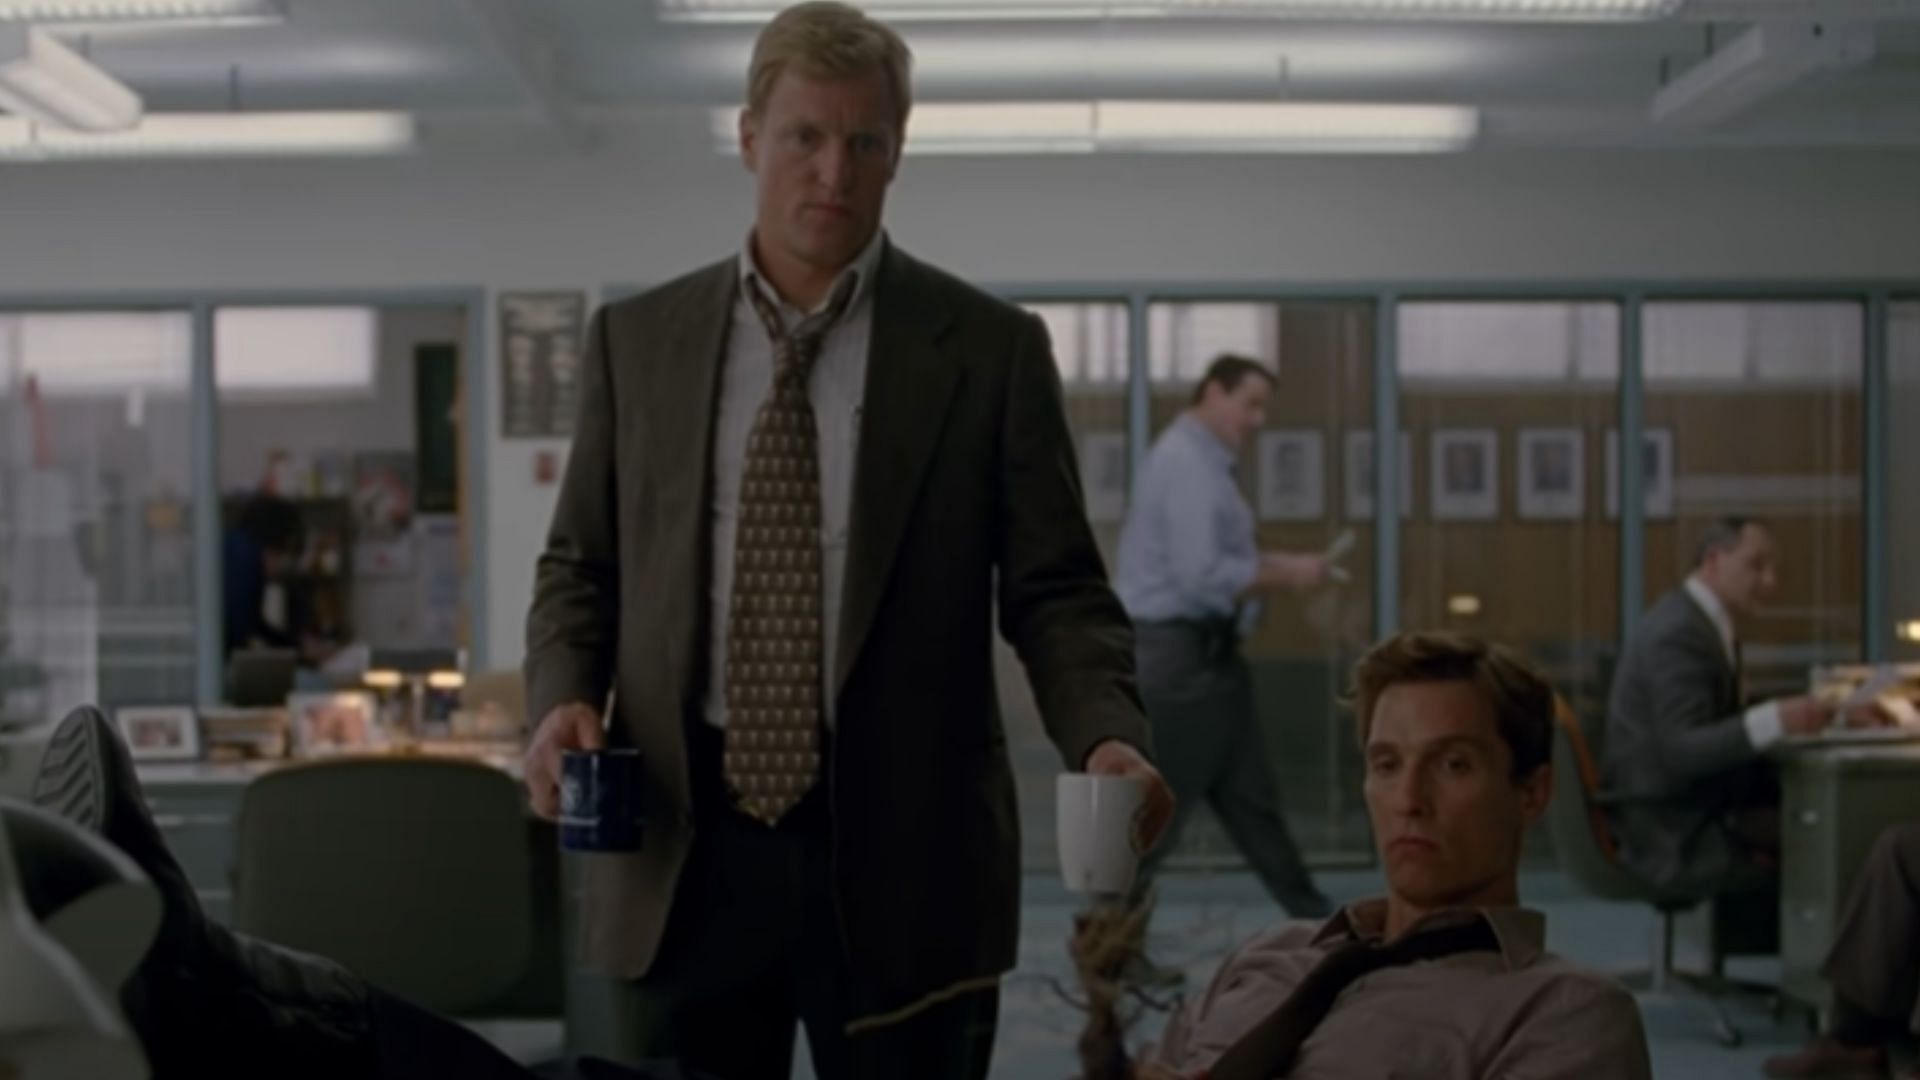 Rust Cohle and Marty Hart in True Detective seasin 1 (Image via HBO UK)